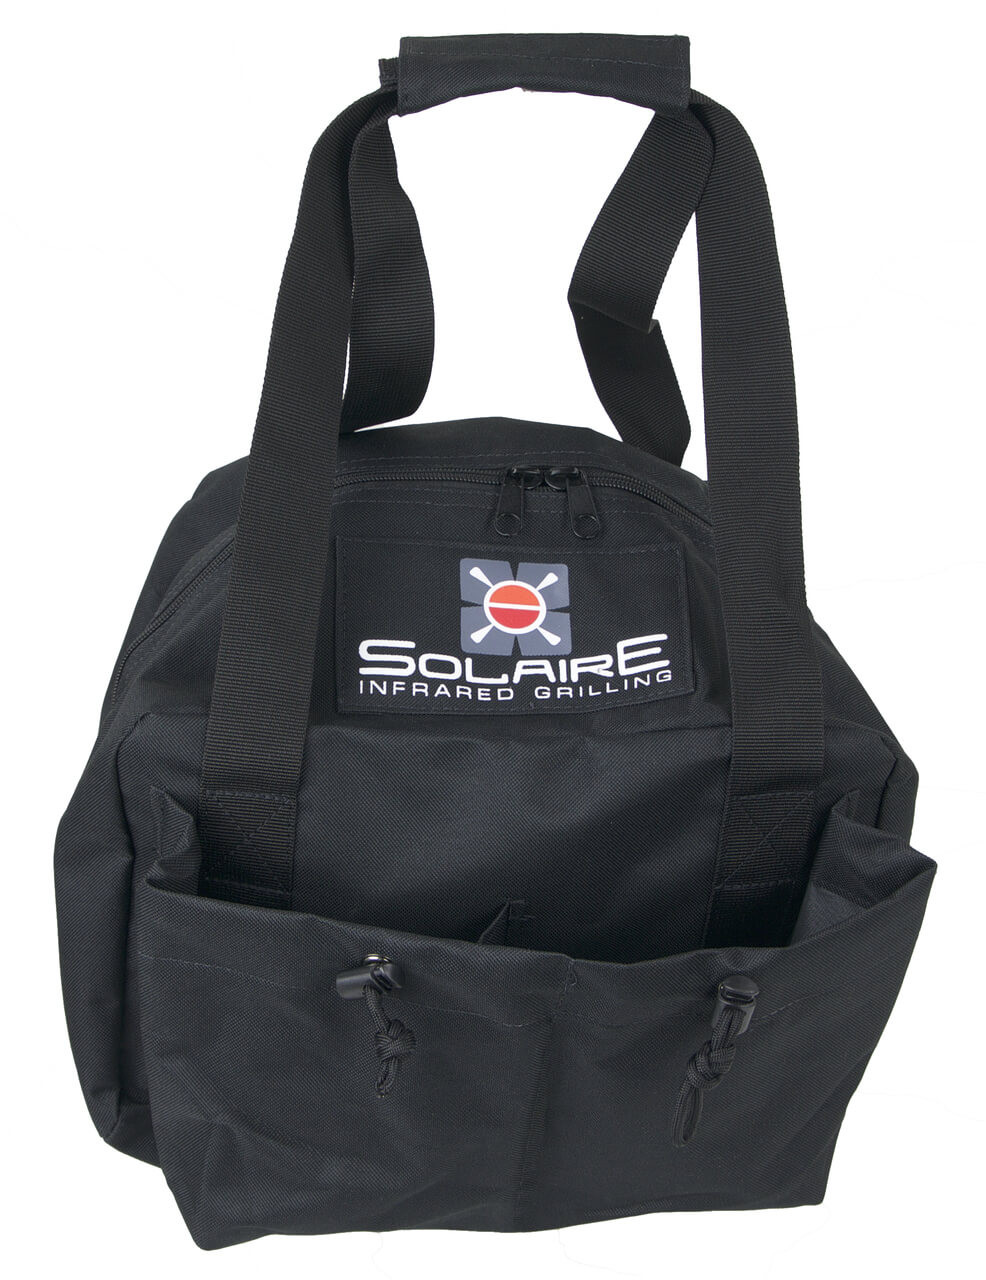 Carrying Bag for Solaire Mini Infrared Grill, Front view